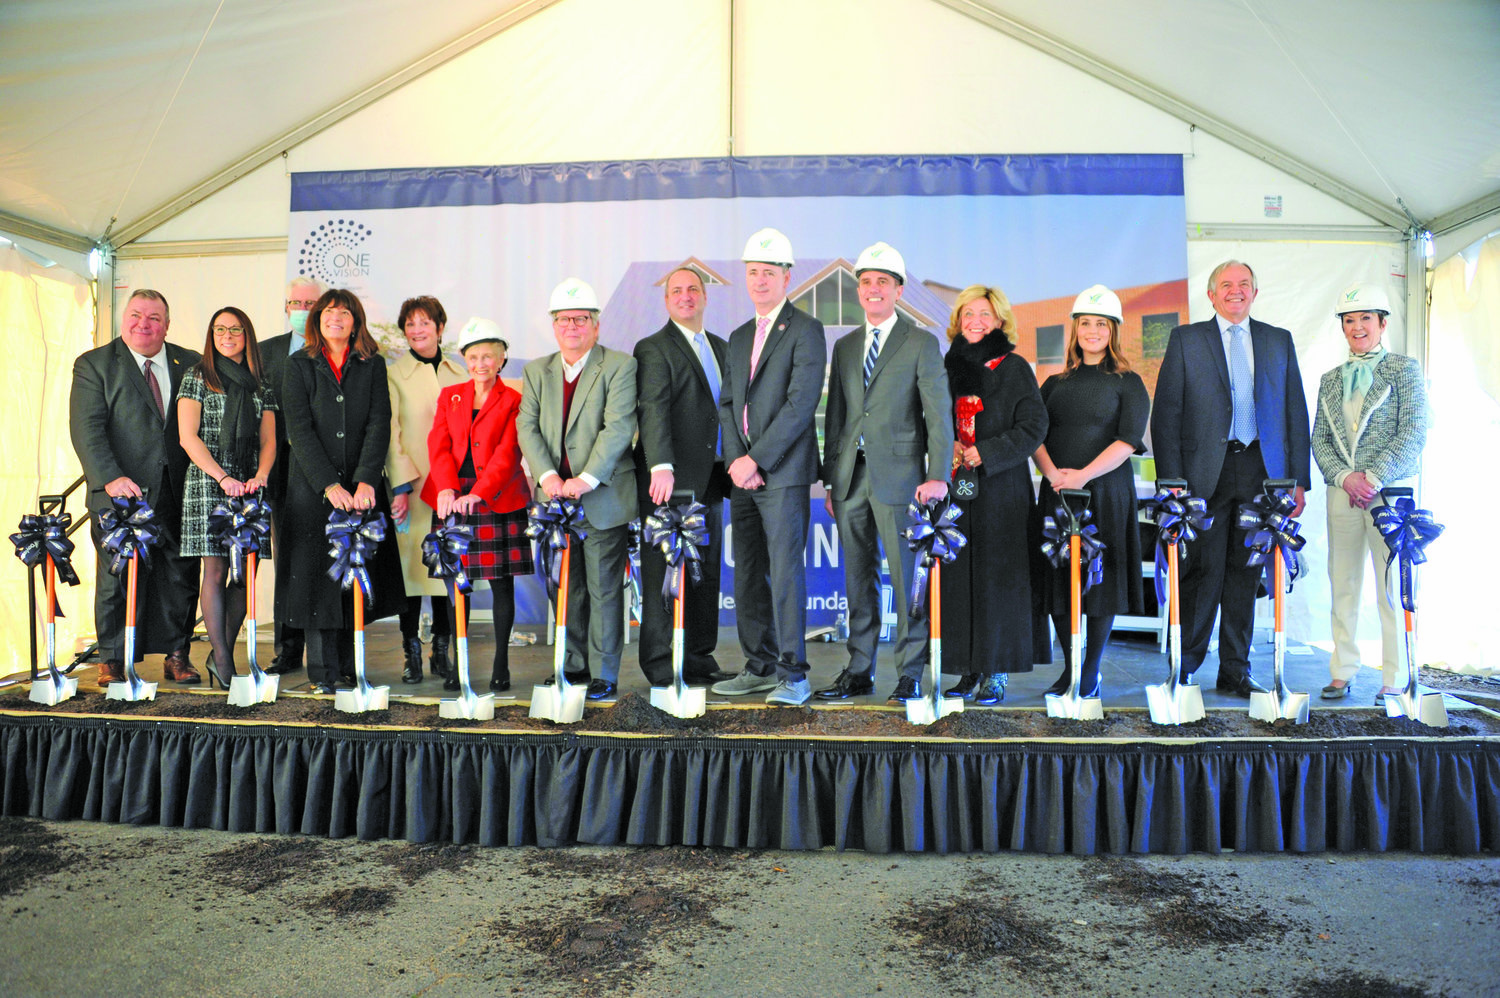 Taking part in the new groundbreaking ceremony for the new Children’s Village at Doylestown Hospital are local business and political leaders.